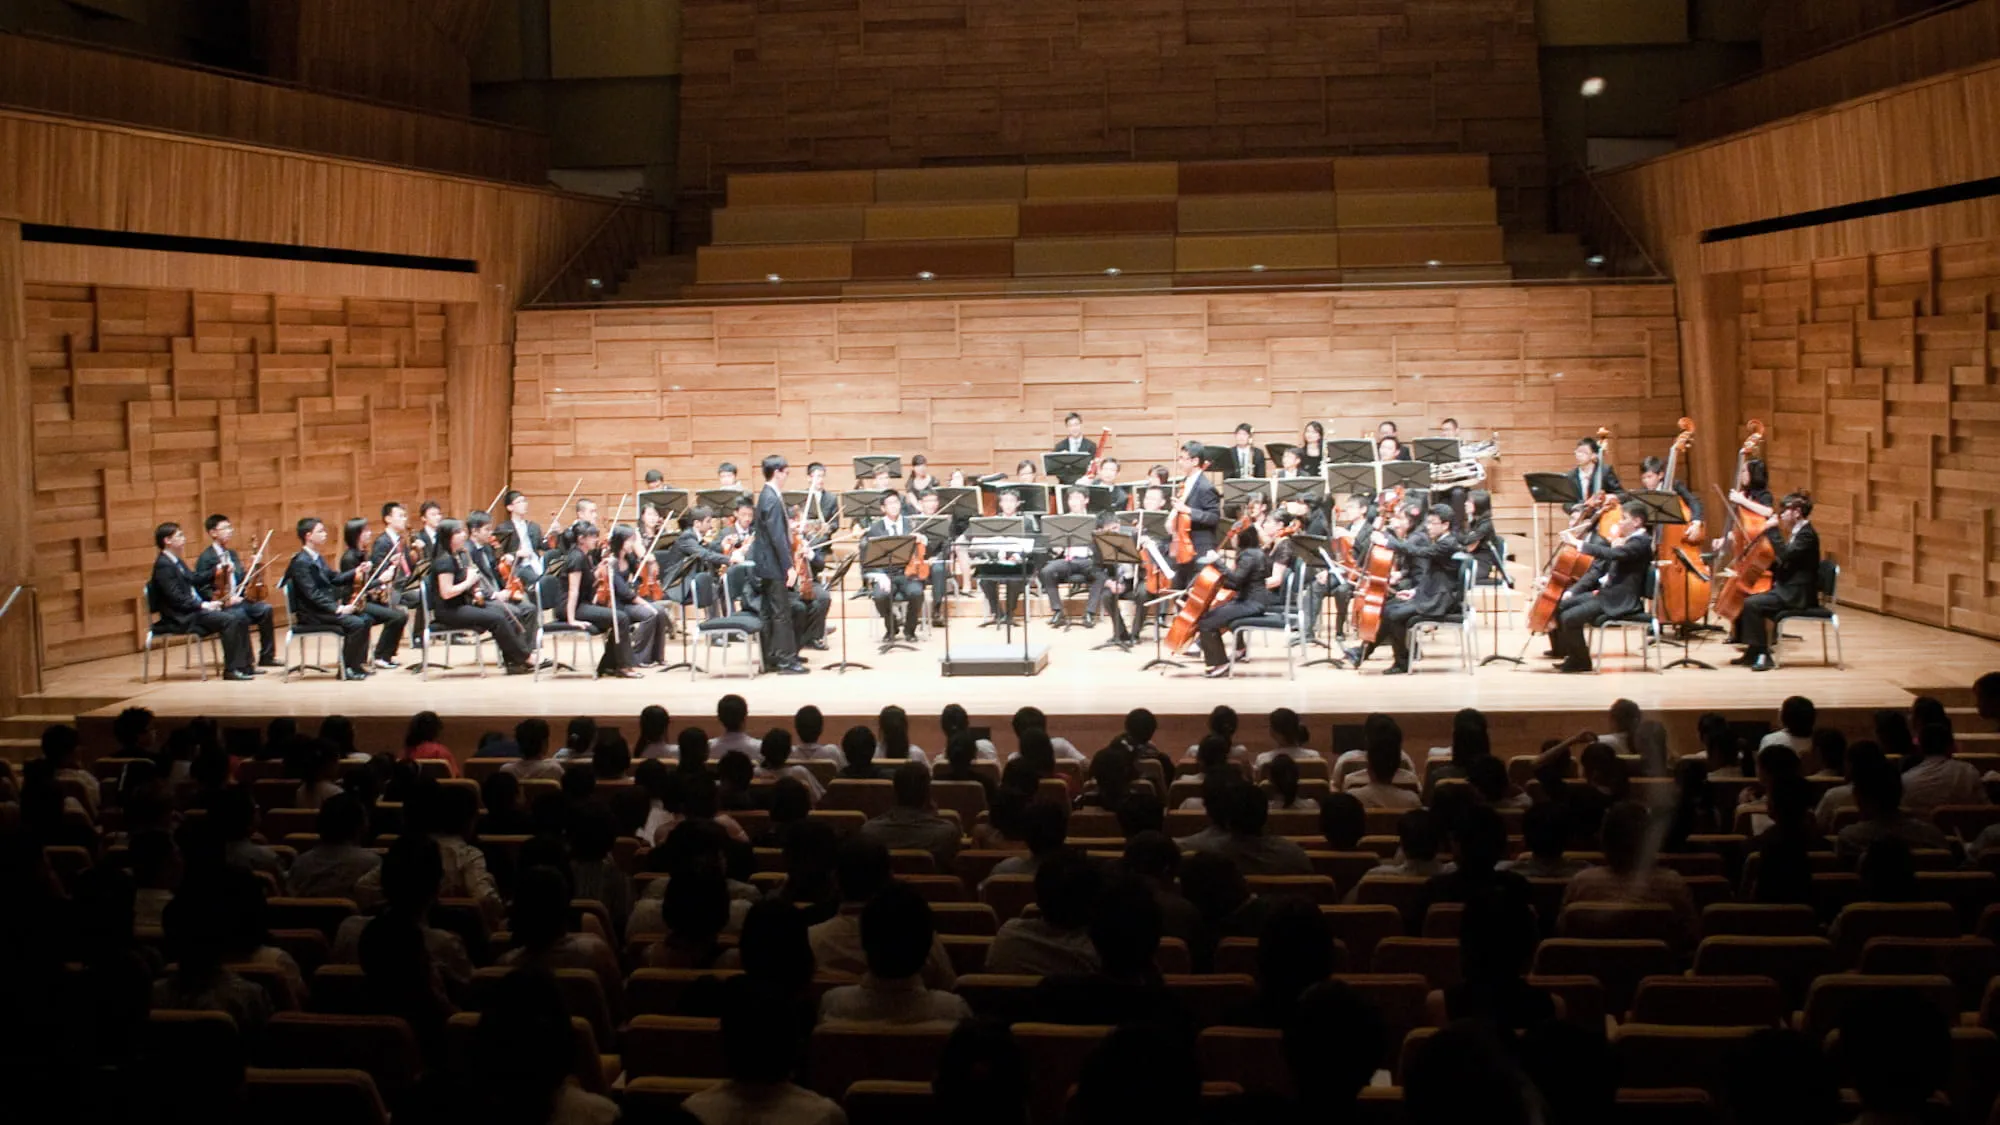 Orchestral performace at Singapore SOTA